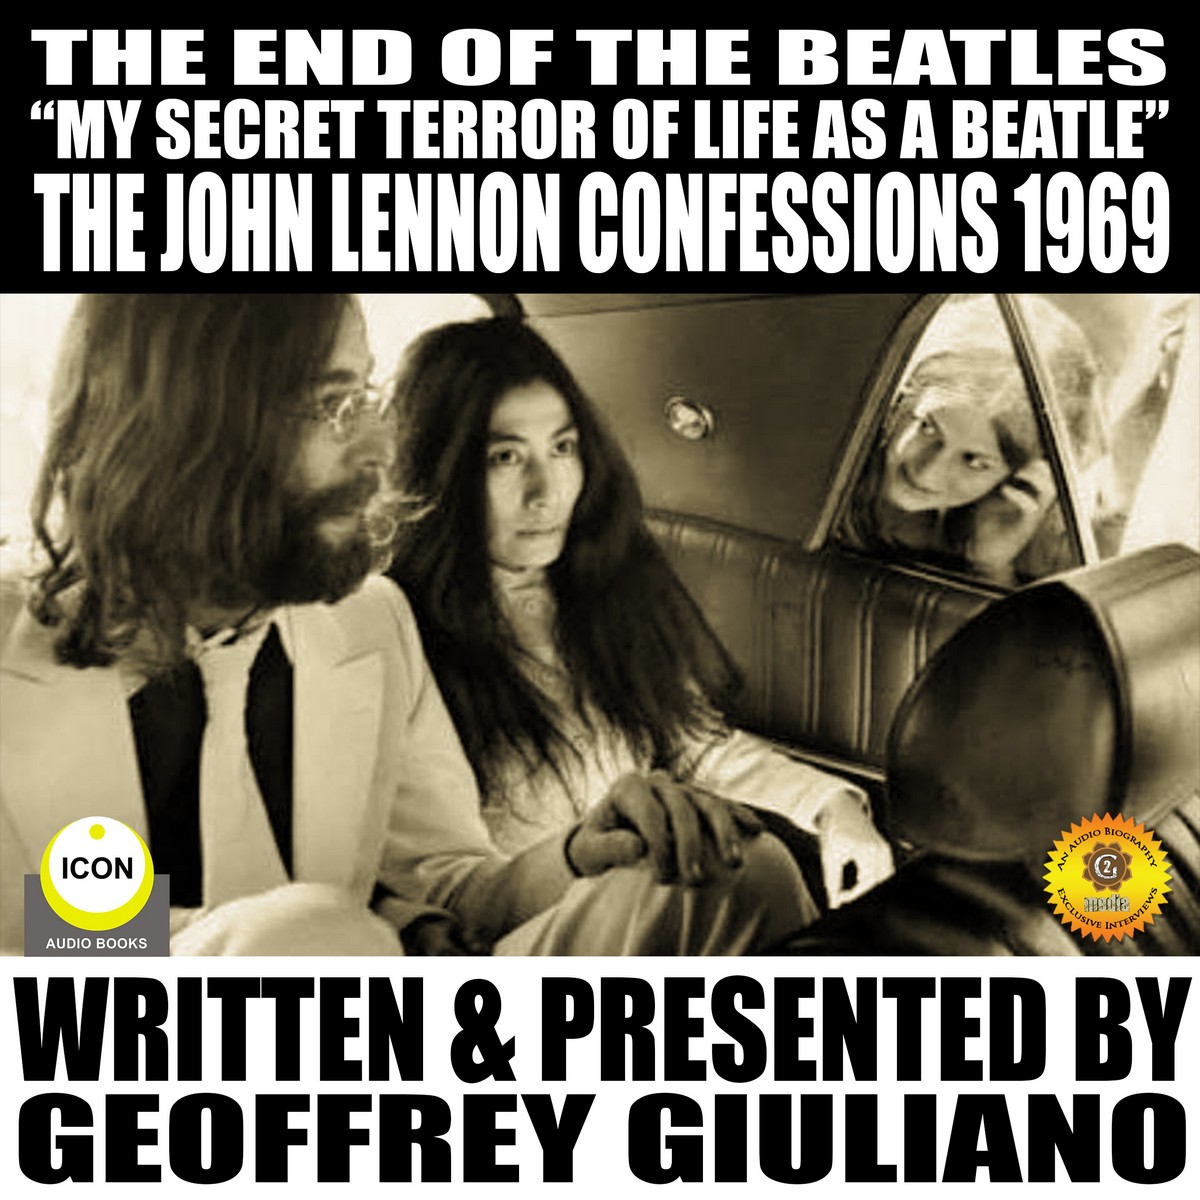 The End Of The Beatles “My secret Terror Of Line As A Beatle” The John Lennon Confessions 1969